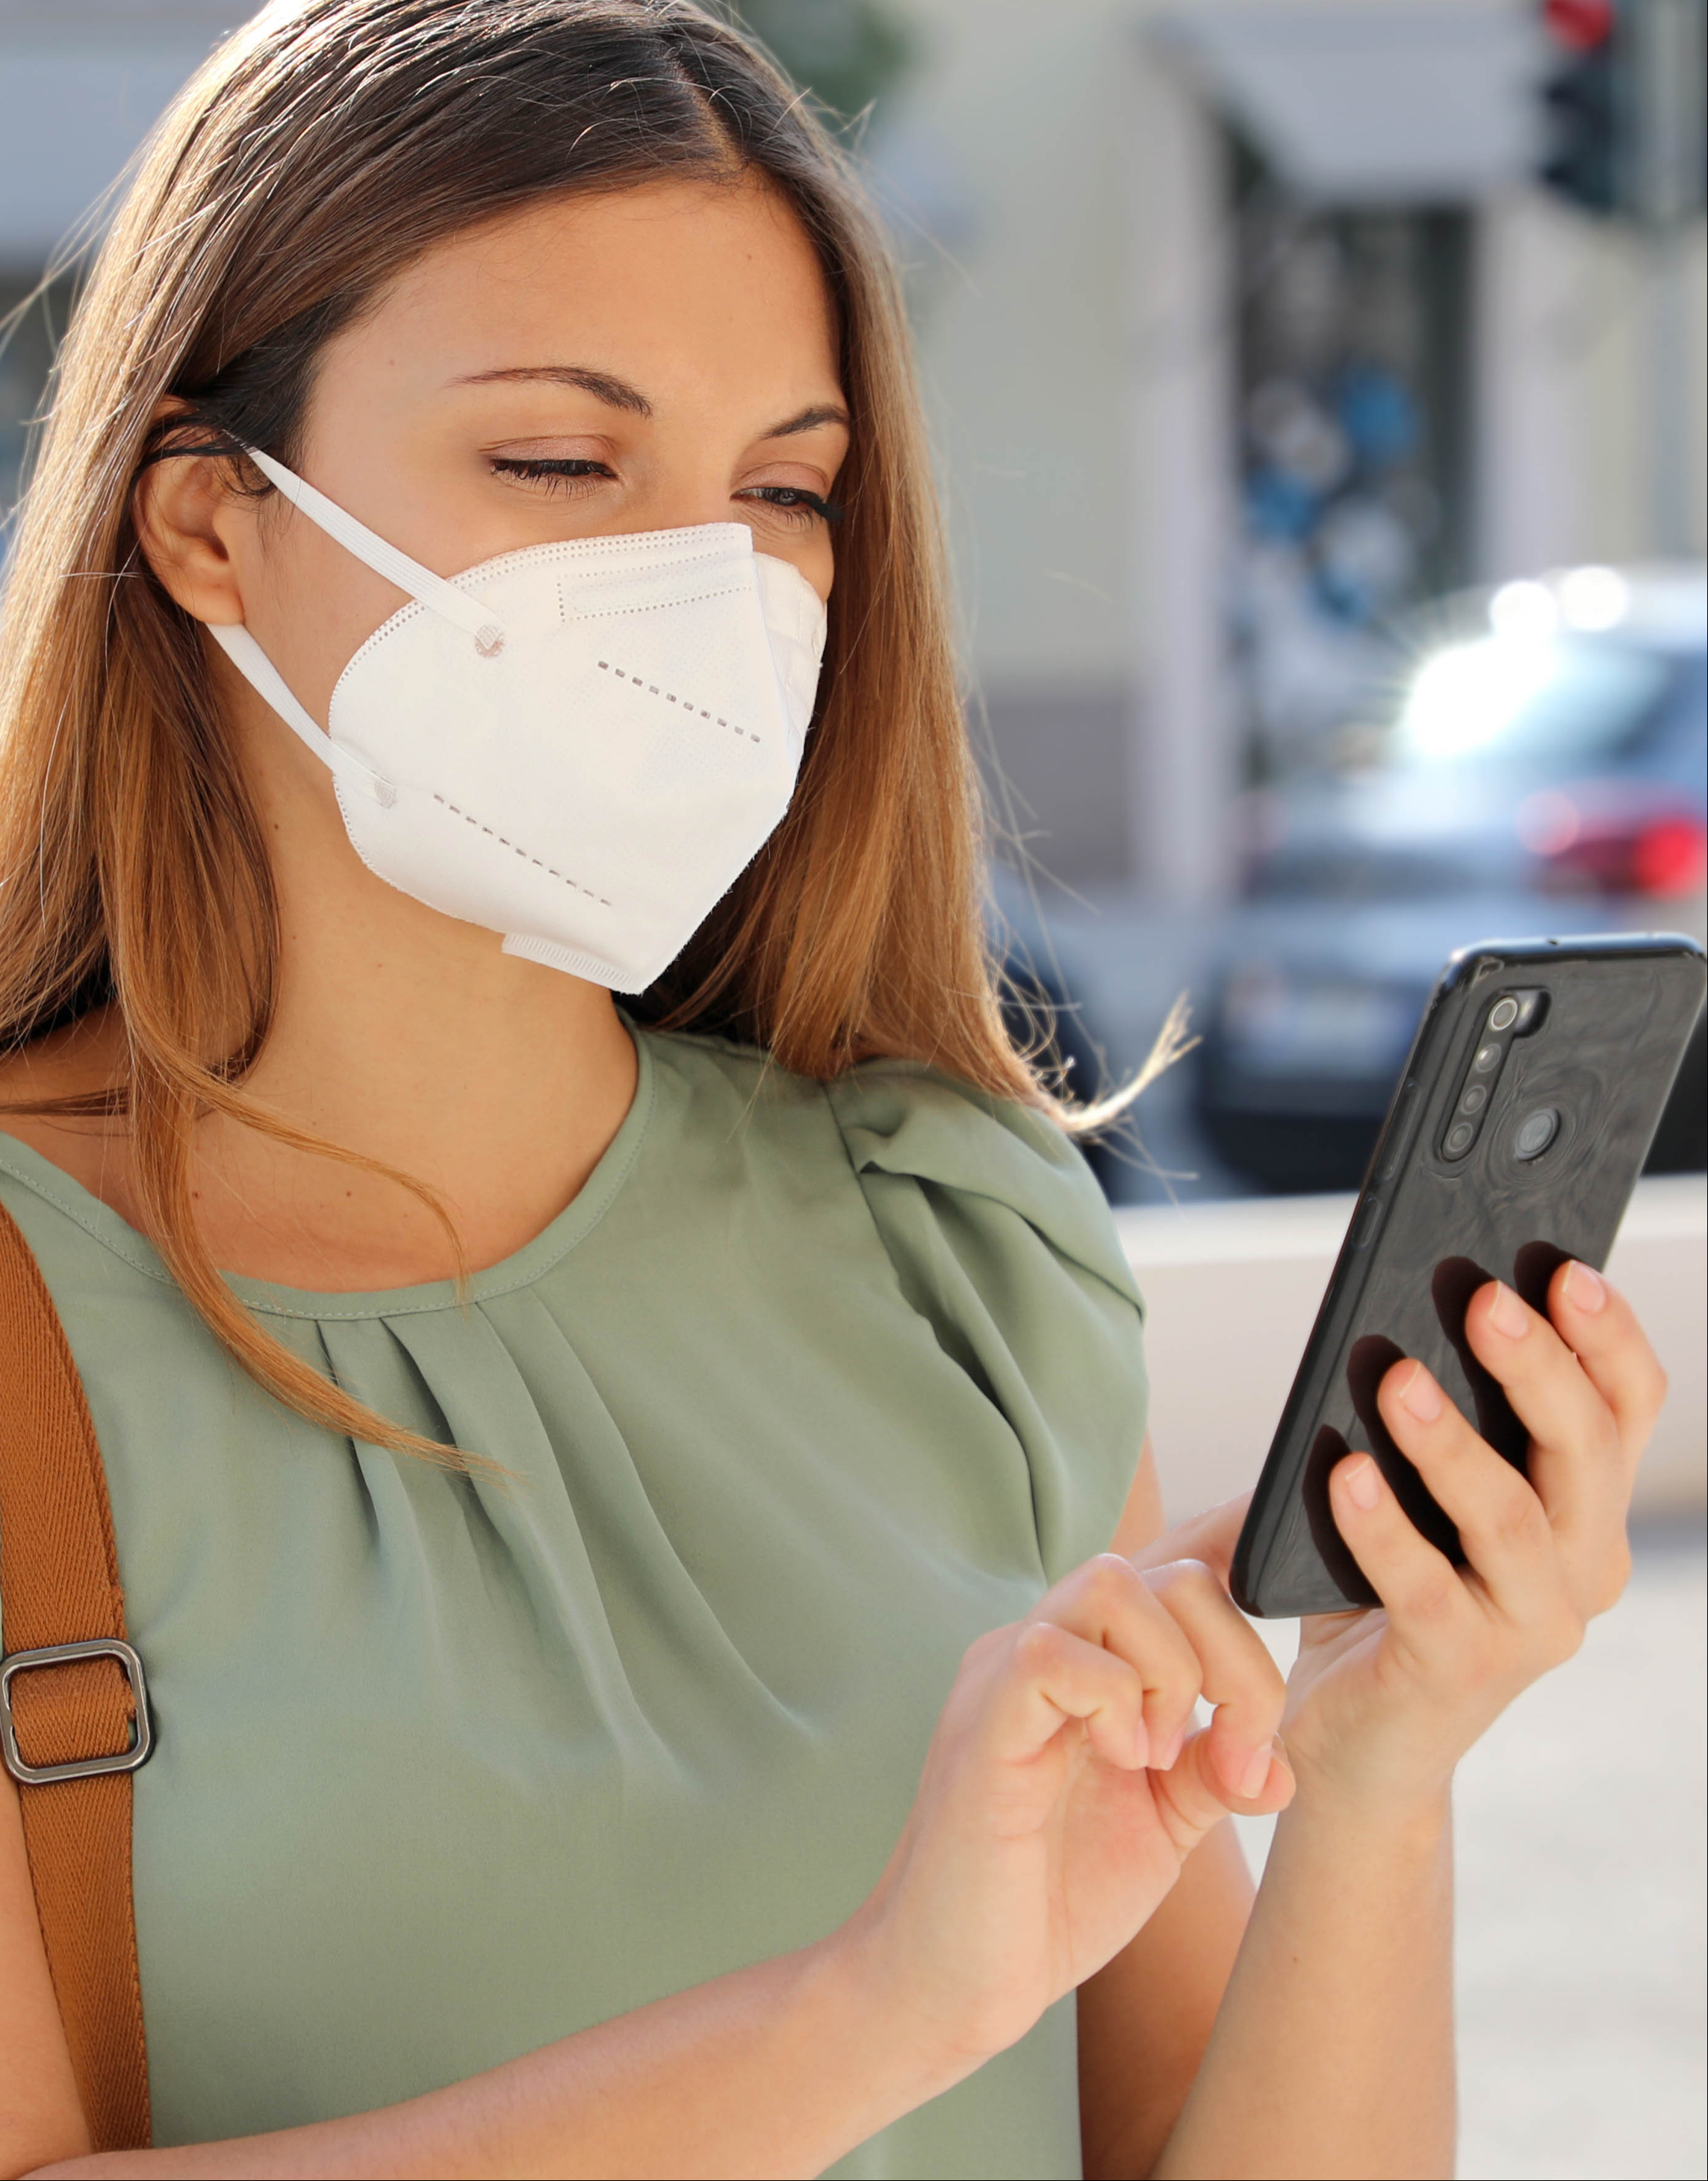 Image: woman wearing facemask using a mobile app